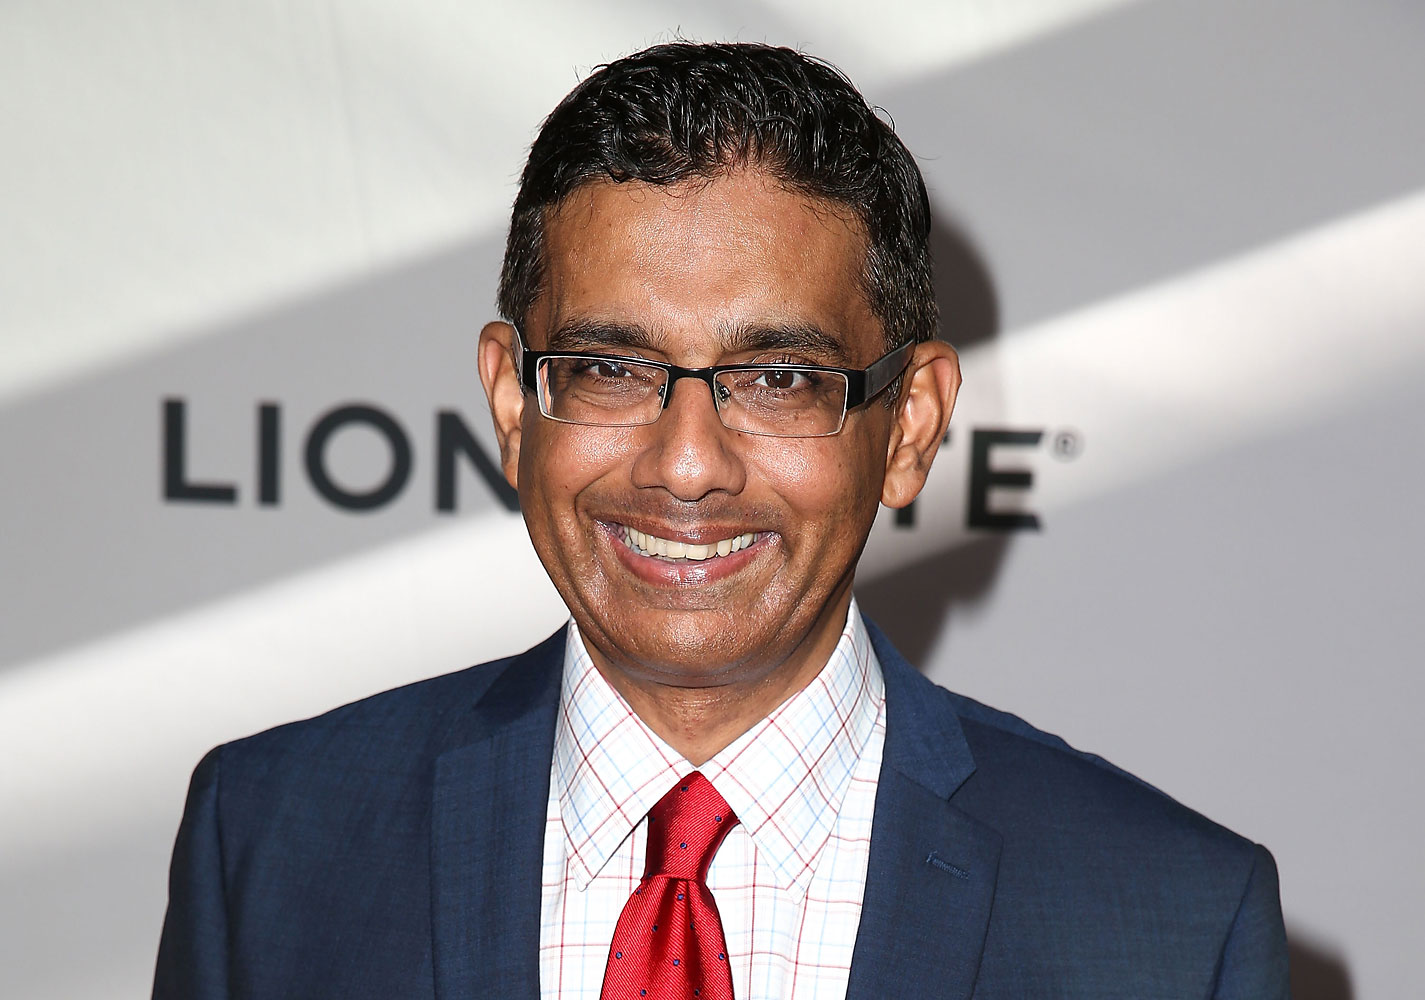 Filmmaker Dinesh D'Souza attends the premiere of Lionsgate Films' 'America' at Regal Cinemas L.A. Live on June 30, 2014 in Los Angeles. (Imeh Akpanudosen—Getty Images)